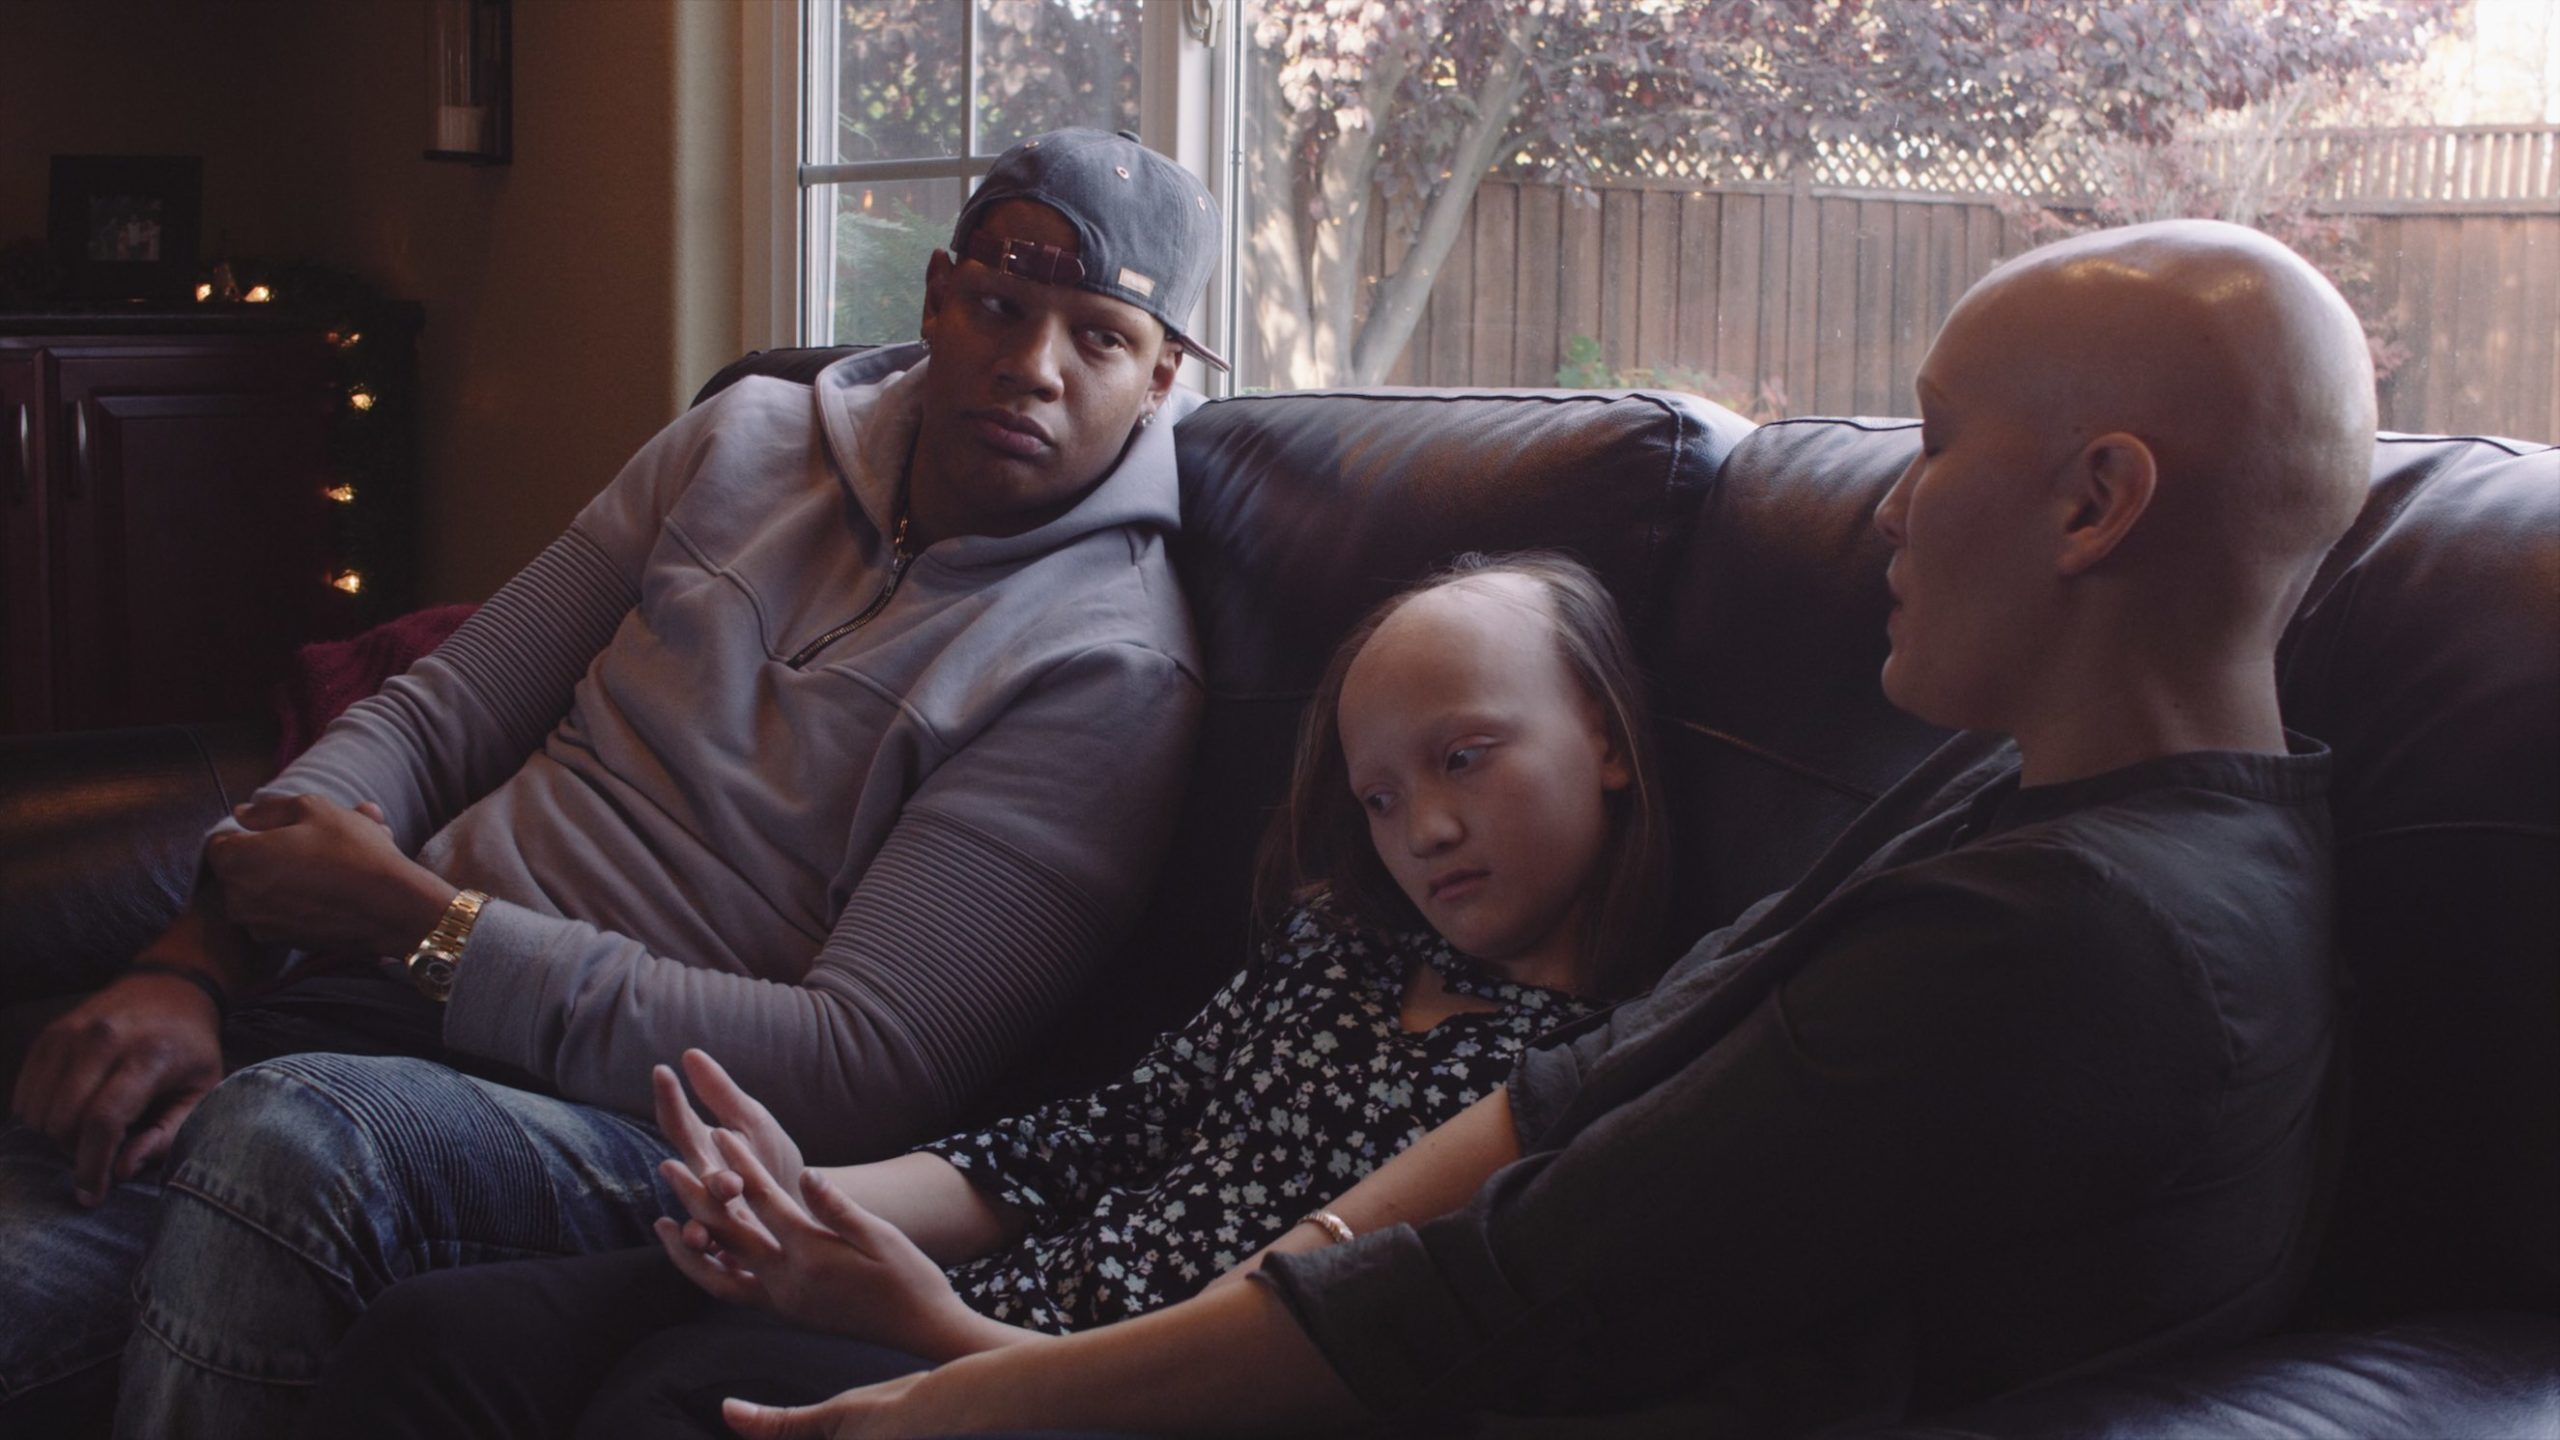 Video Documentary on Charlie Villanueva What is alopecia Man wearing a grey sweatshirt sitting on a couch with girl and woman with the condition